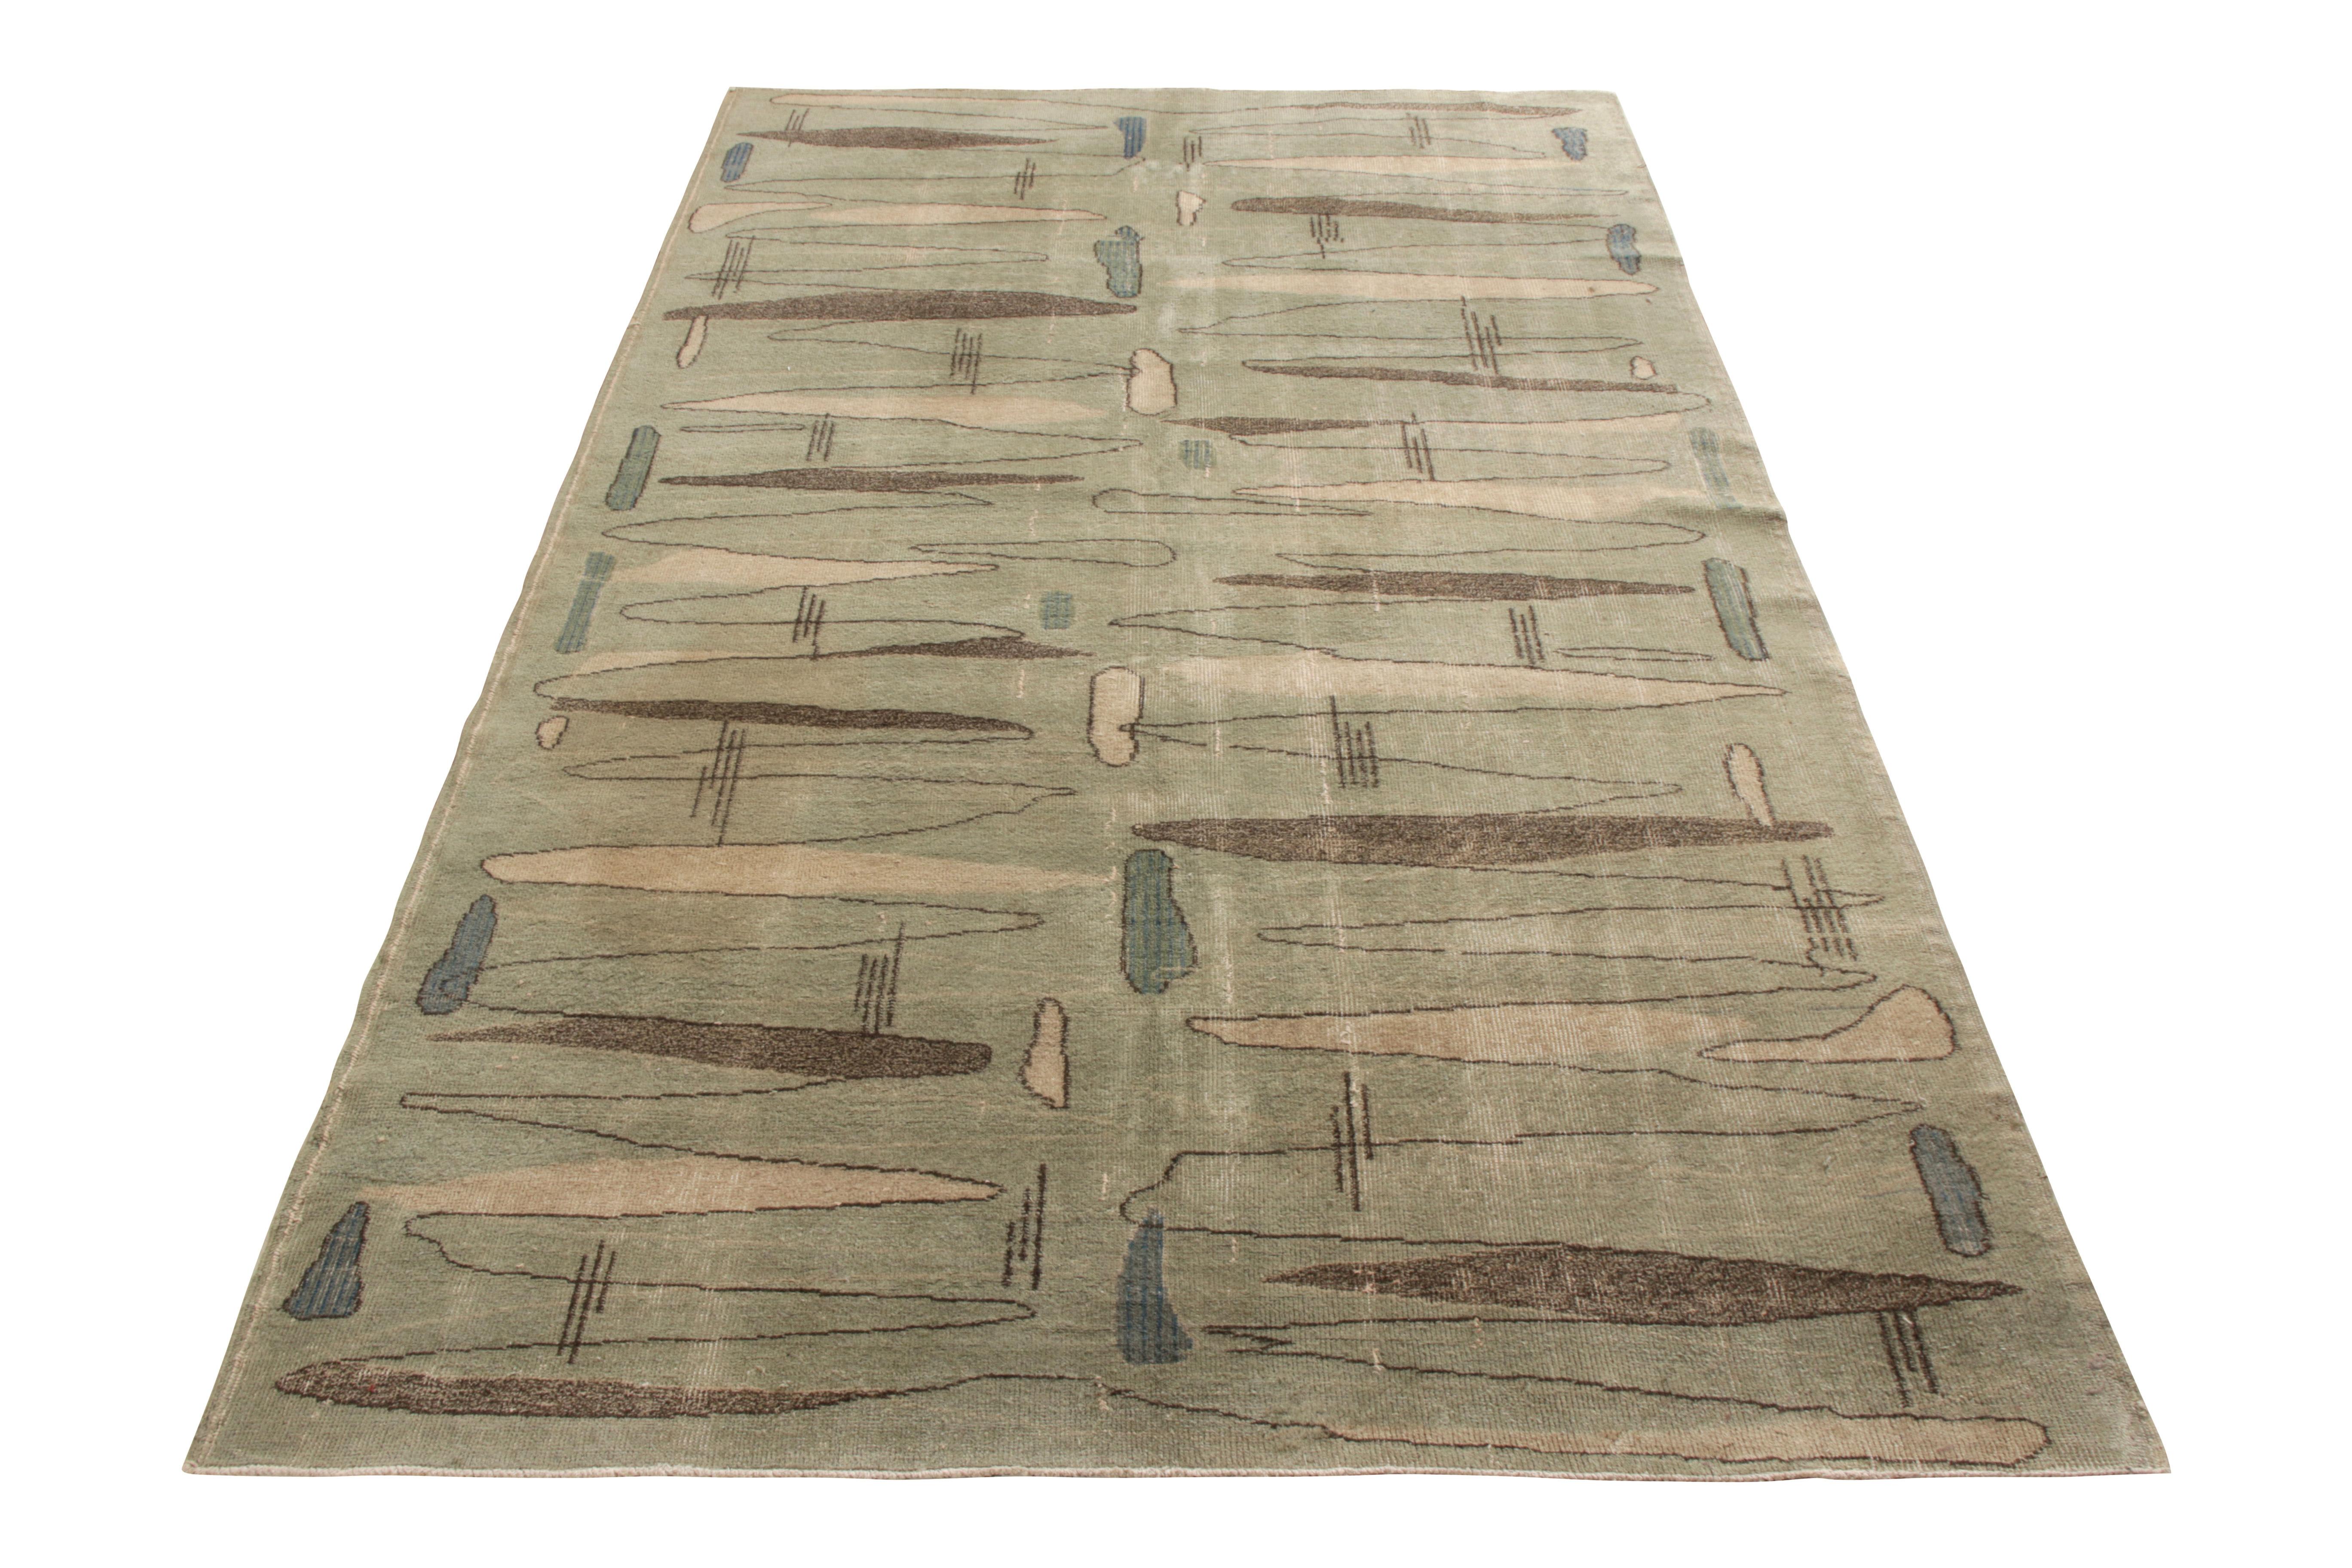 Hand knotted in wool from Turkey circa 1960-1970, a 5x8 rug joining Rug & Kilim’s Mid-Century Pasha Collection celebrating the works of mid-century icon Zeki Müren. Bearing the line’s signature mid-century and Deco sensibilities, this rug enjoys a